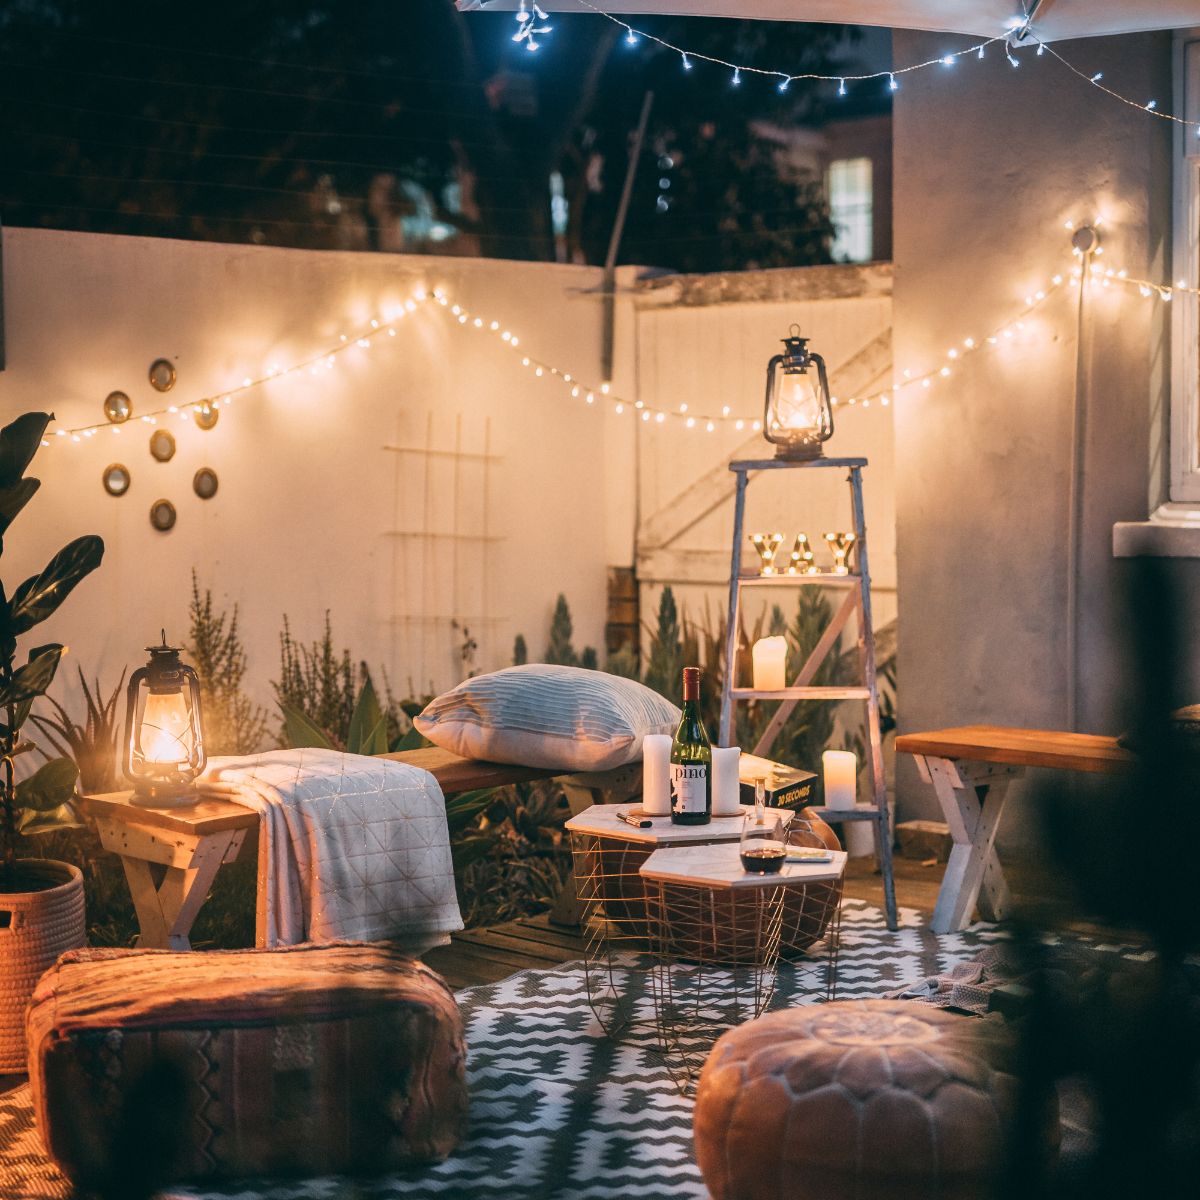 A very homey spot in the backyard, set up with a few sitting areas, a blanket, and lots of lighting. 